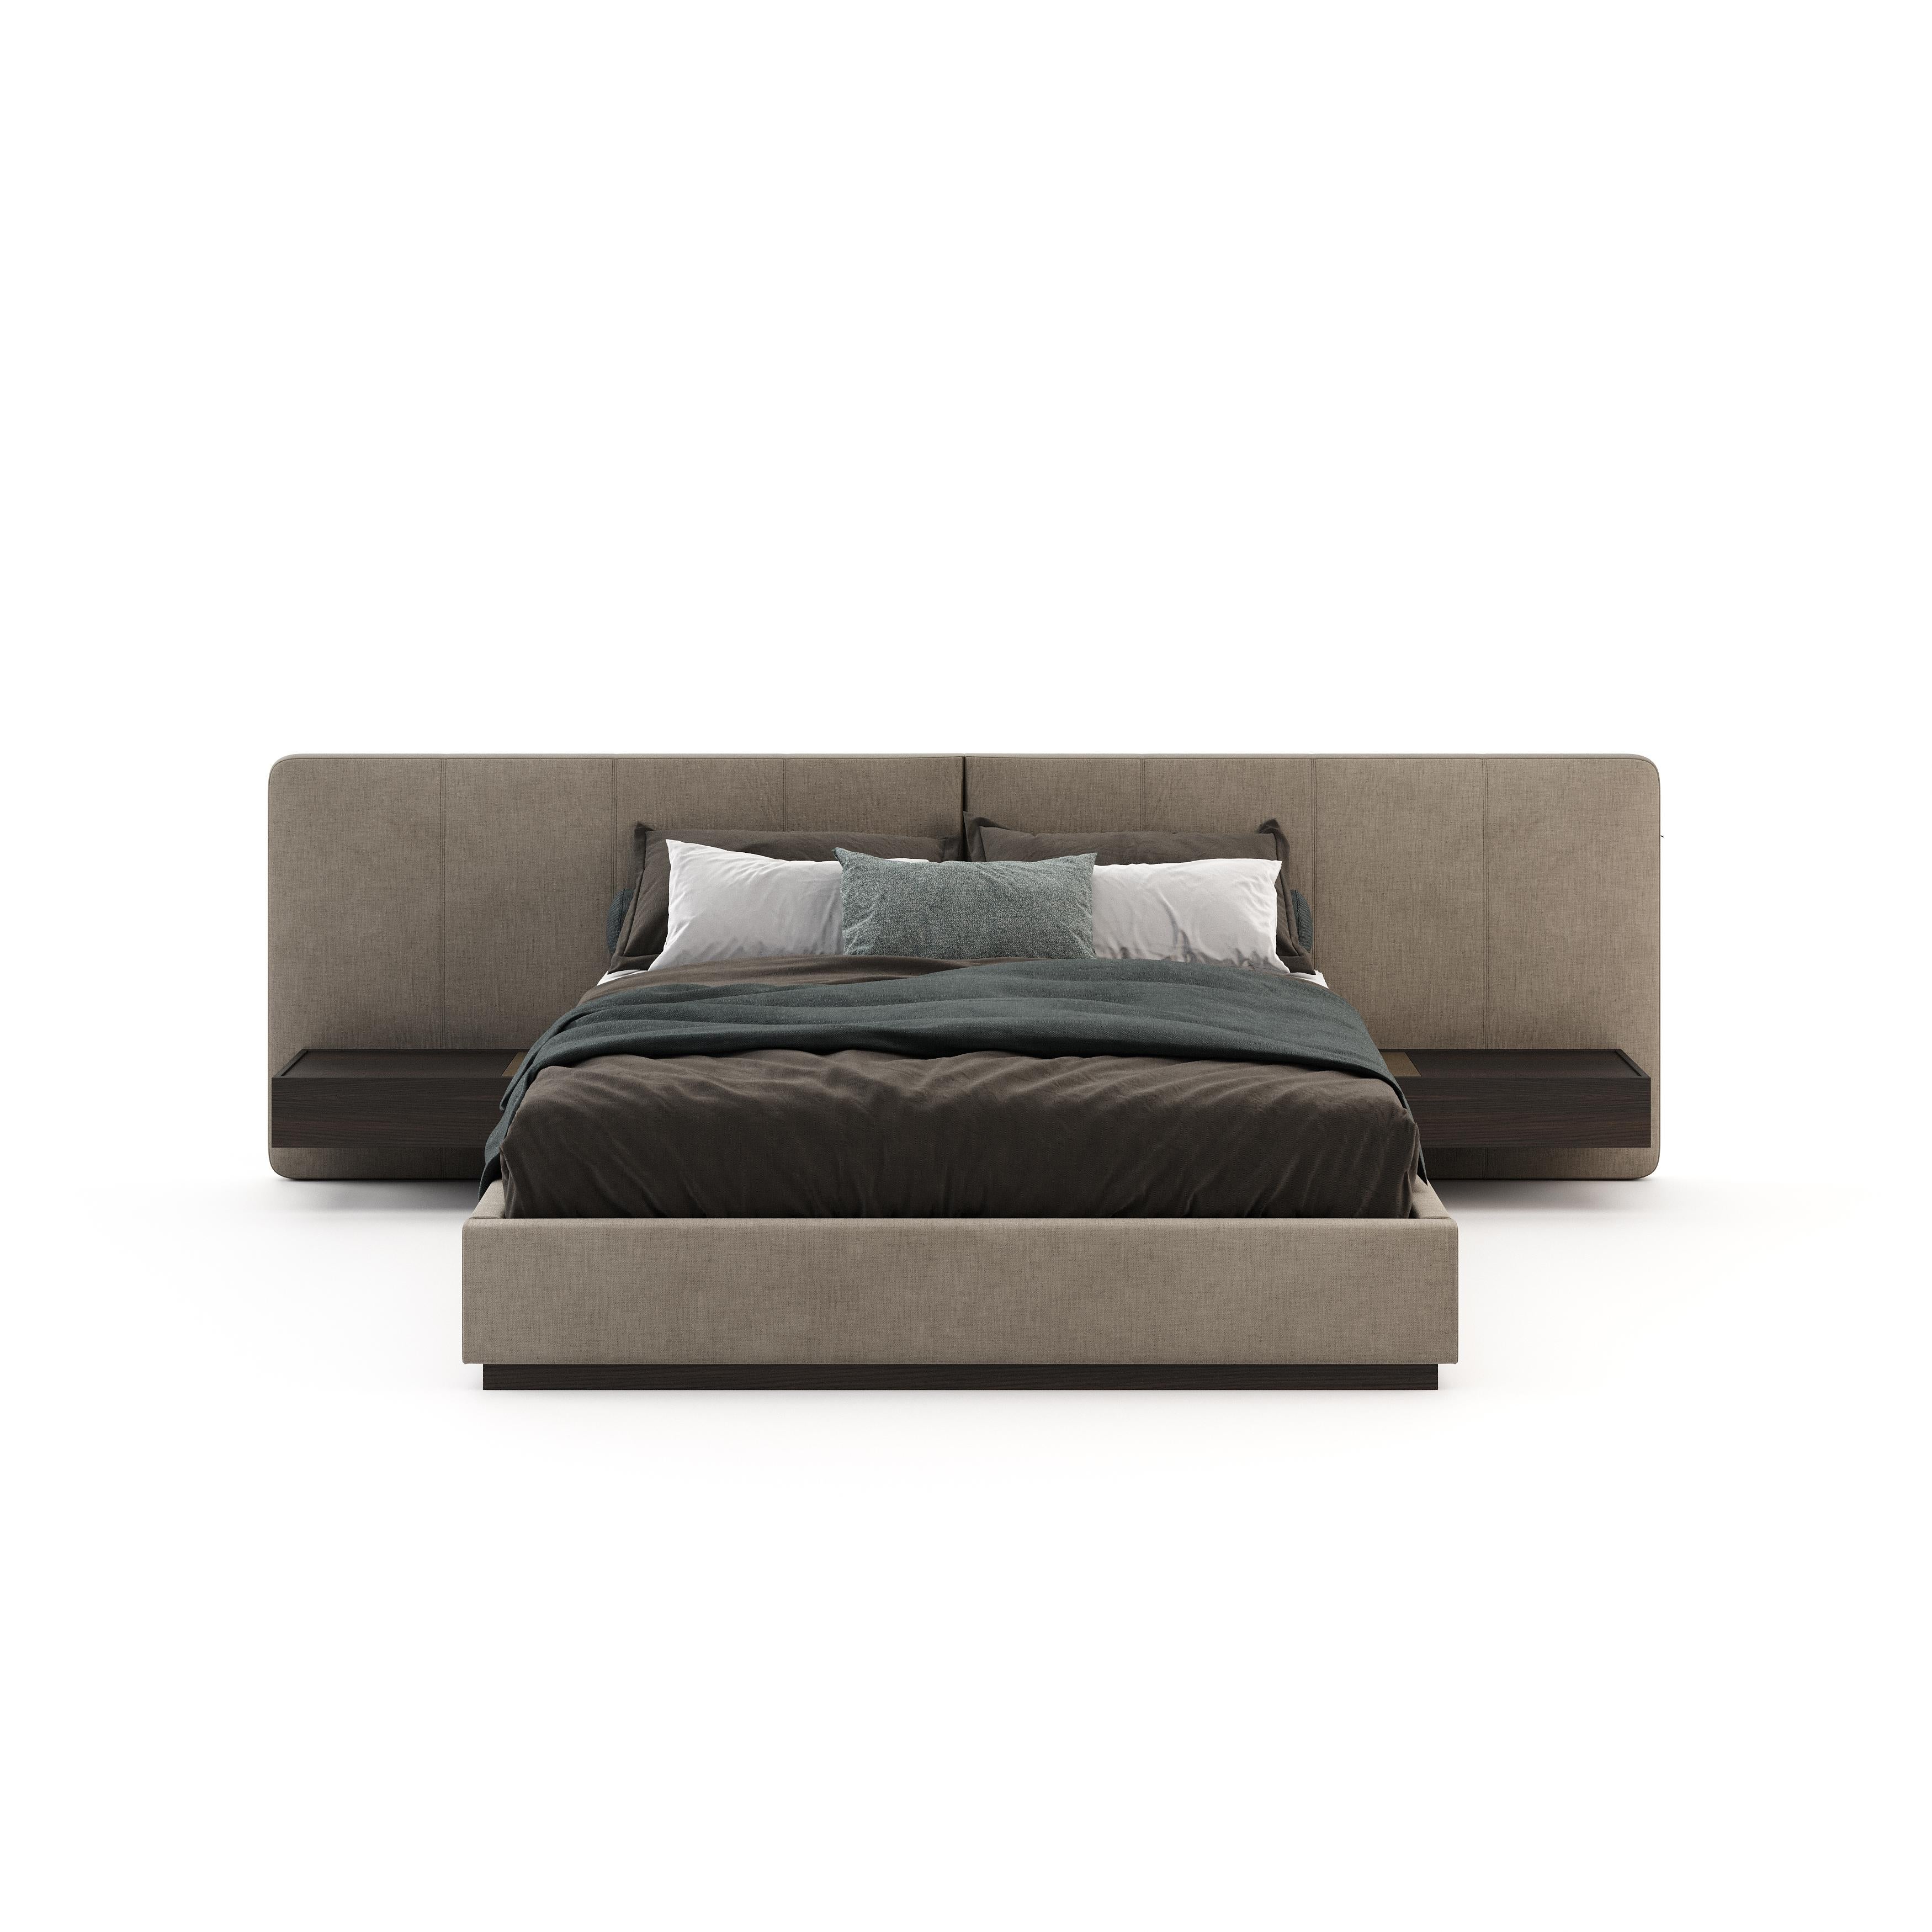 There’s just something about the upholstered Bonnie bed that makes any bedroom infinitely cosier. Spruce up the master suite with this one! This bed with integrated bedside tables, with a matte finish, combines aesthetics and functionality.
This